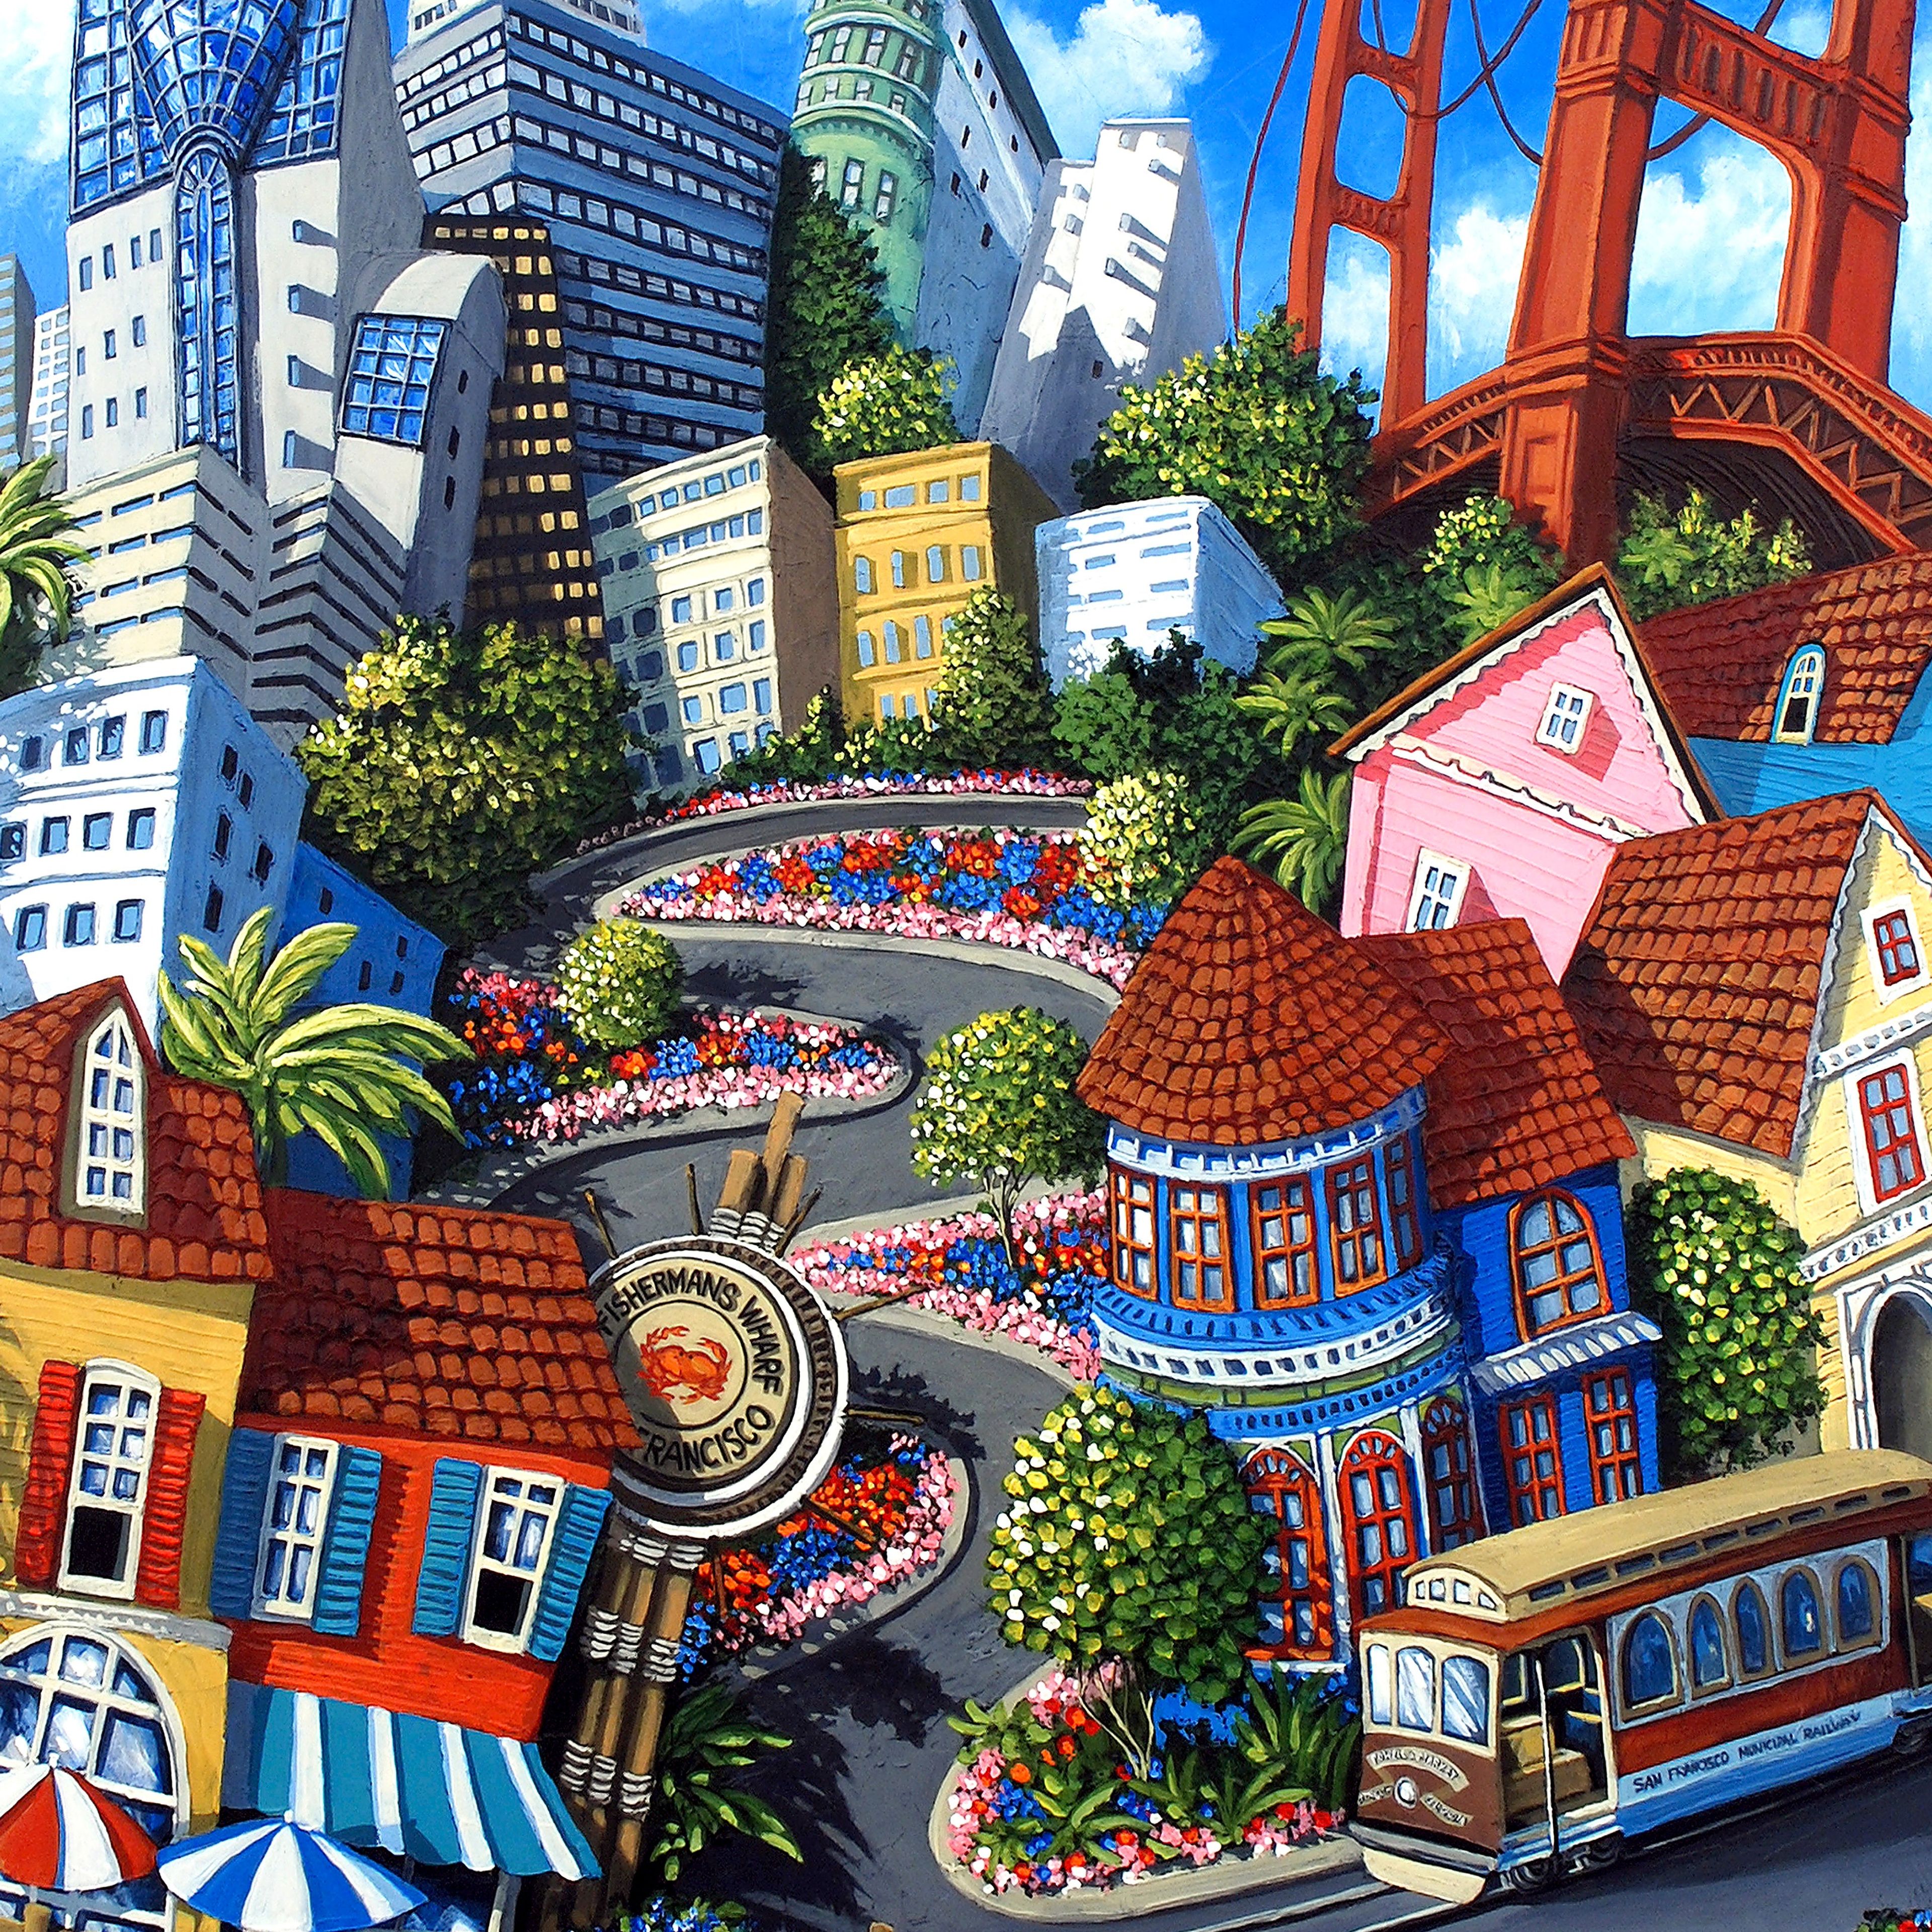 San Francisco - City By the Bay (486 Piece Wooden Jigsaw Puzzle)